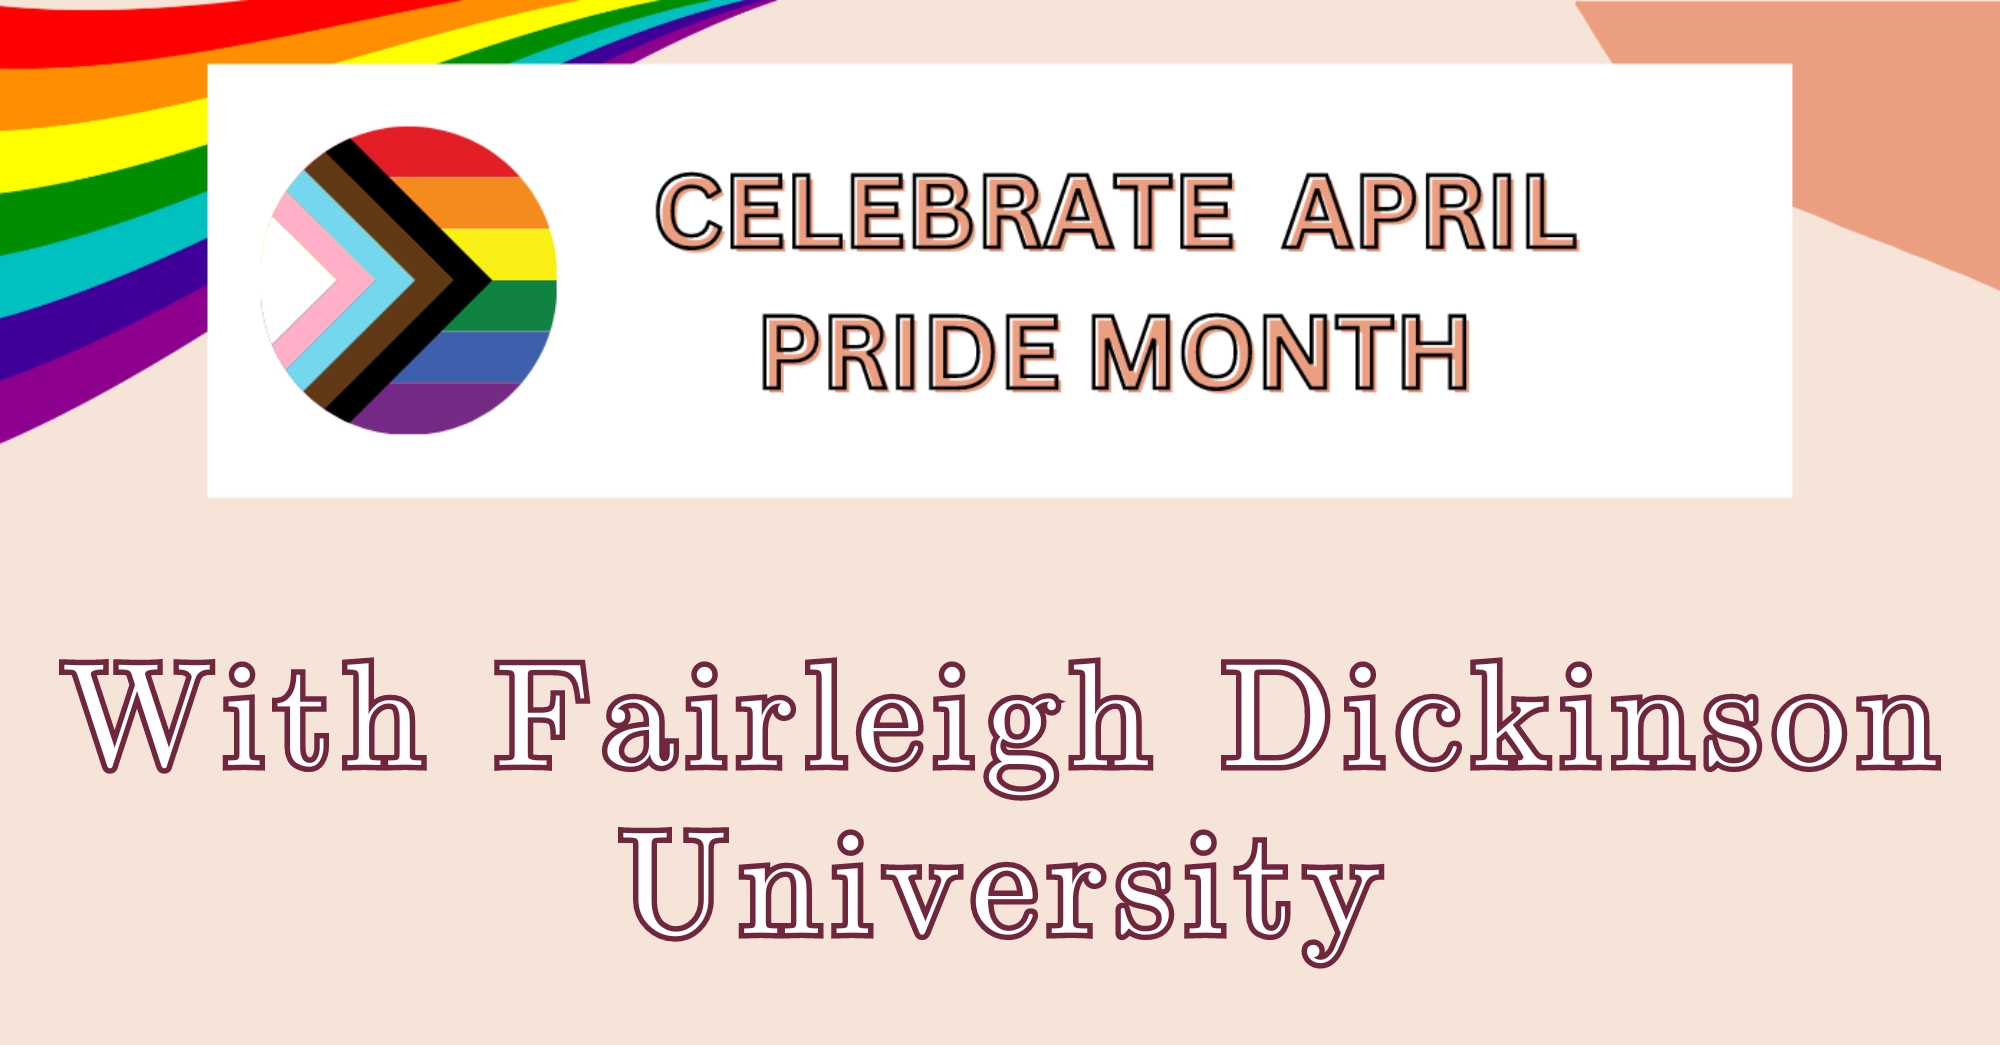 graphic reads "celebrate april pride month with fairleigh dickinson university." graphic depicts two rainbow flags.